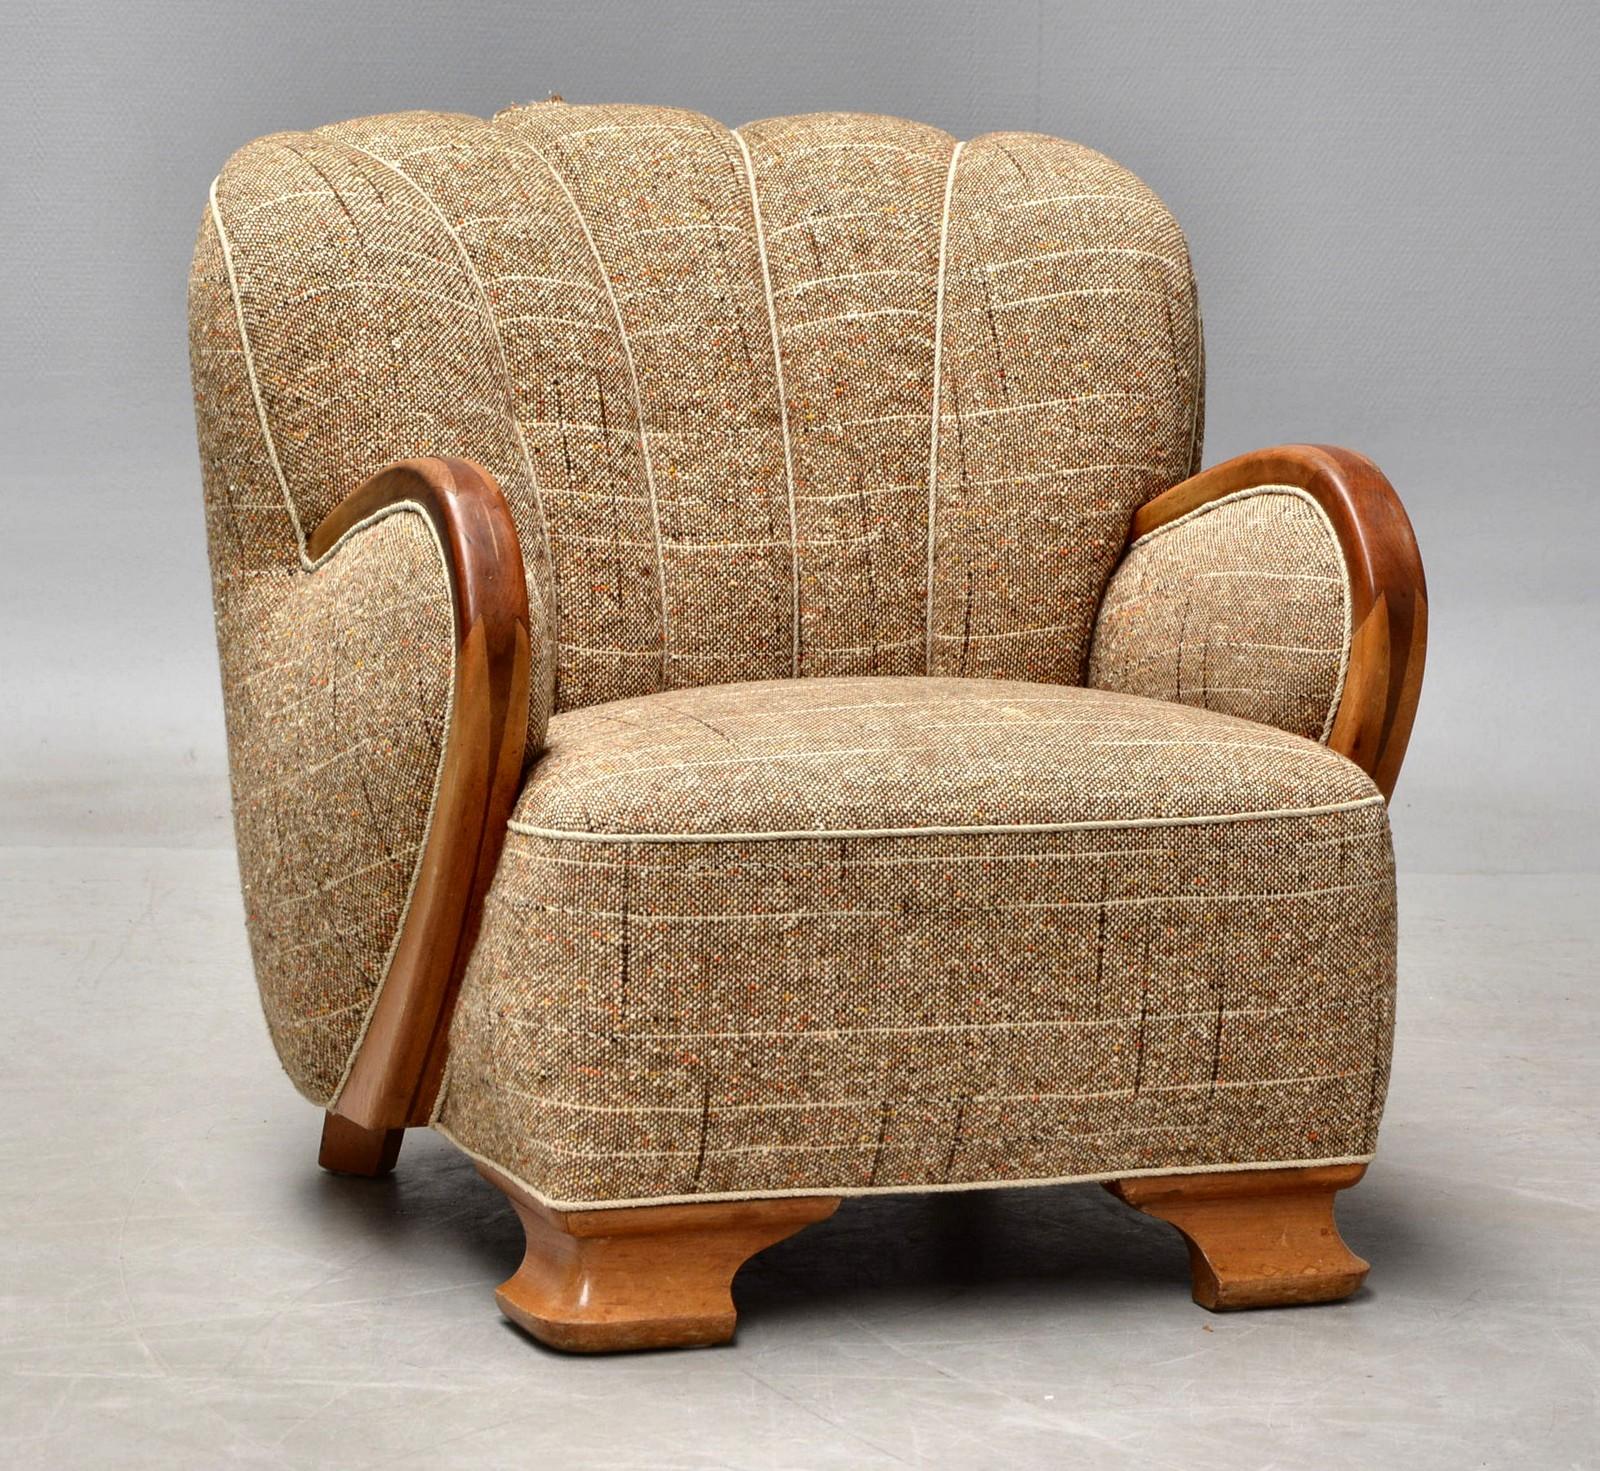 Fantastic 1930s-1940s lounge chair in the style of Mogens Lassen from the late Art Deco early midcentury era. Strong statement piece for any room with it's voluptuous proportions and detailed woodwork in elm and mahogany. Super charming. Overall